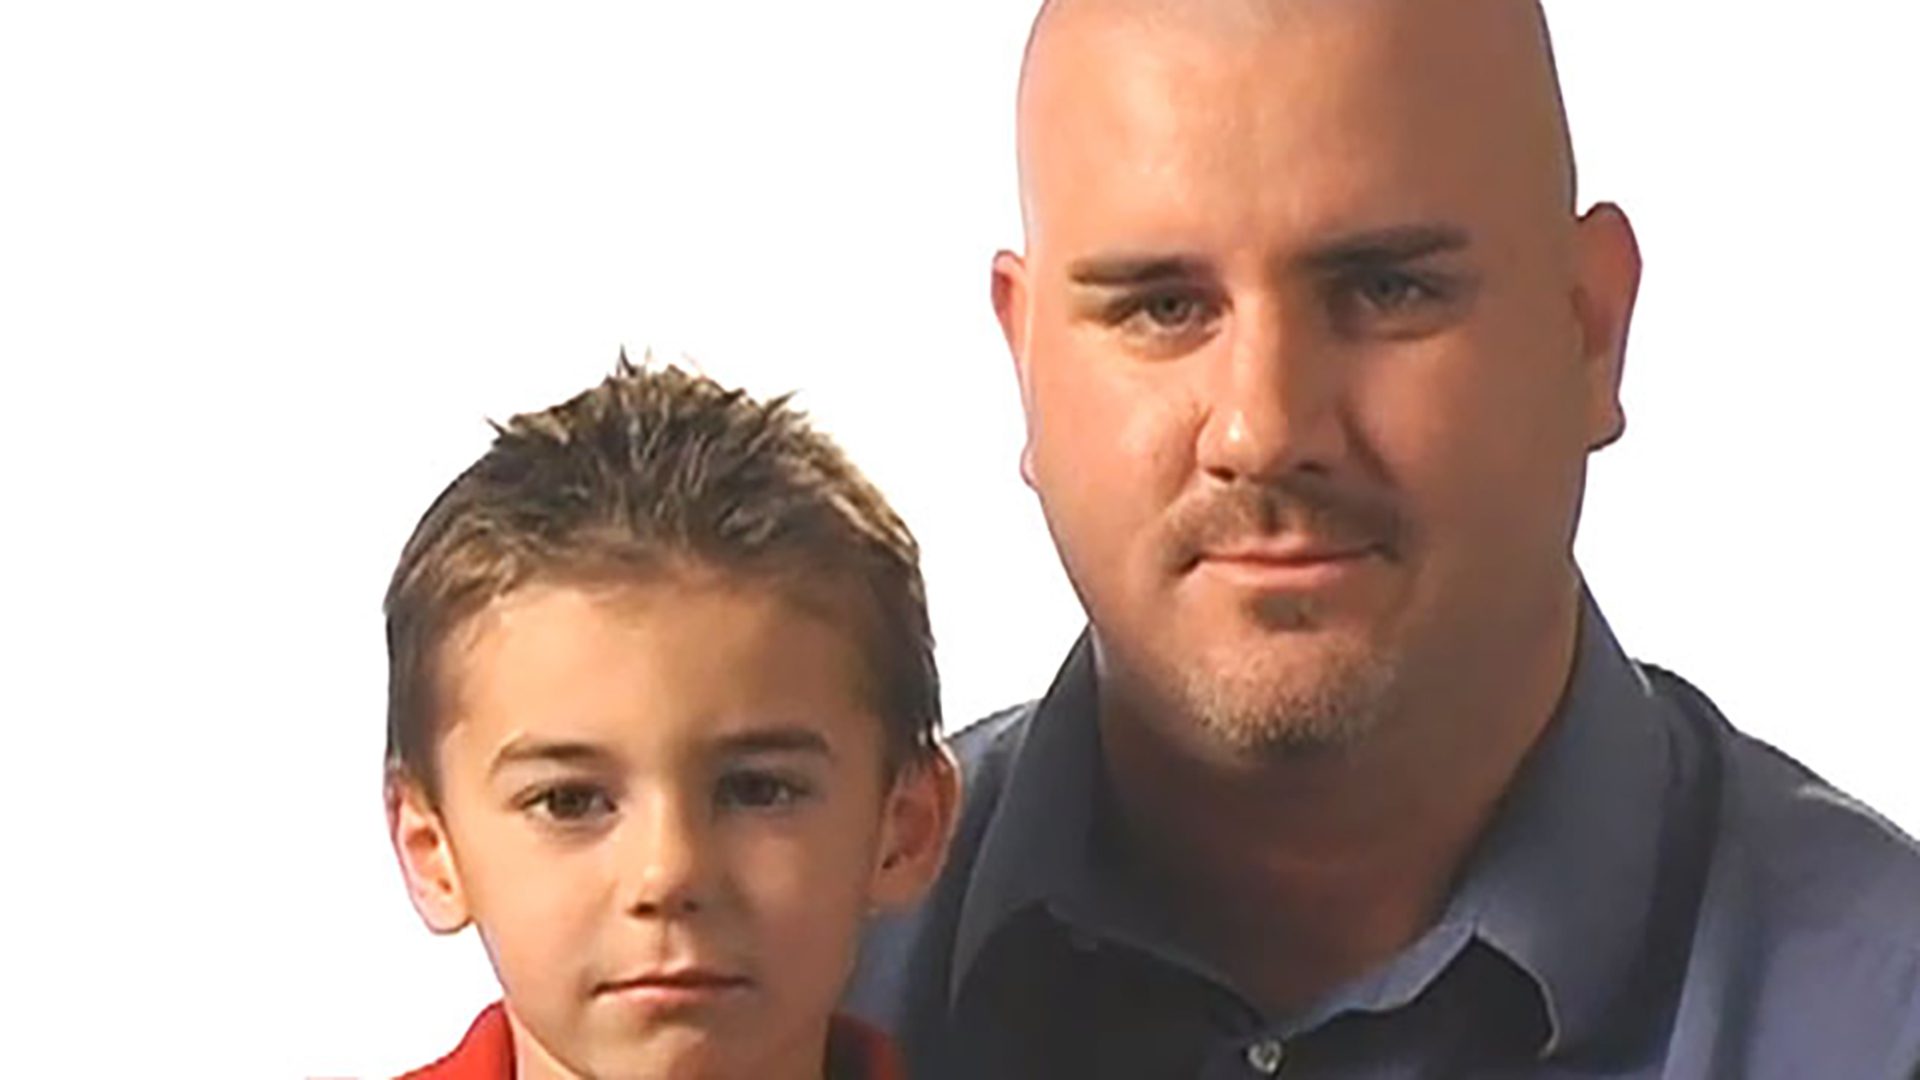 A portrait of a young boy and his father against a white background.